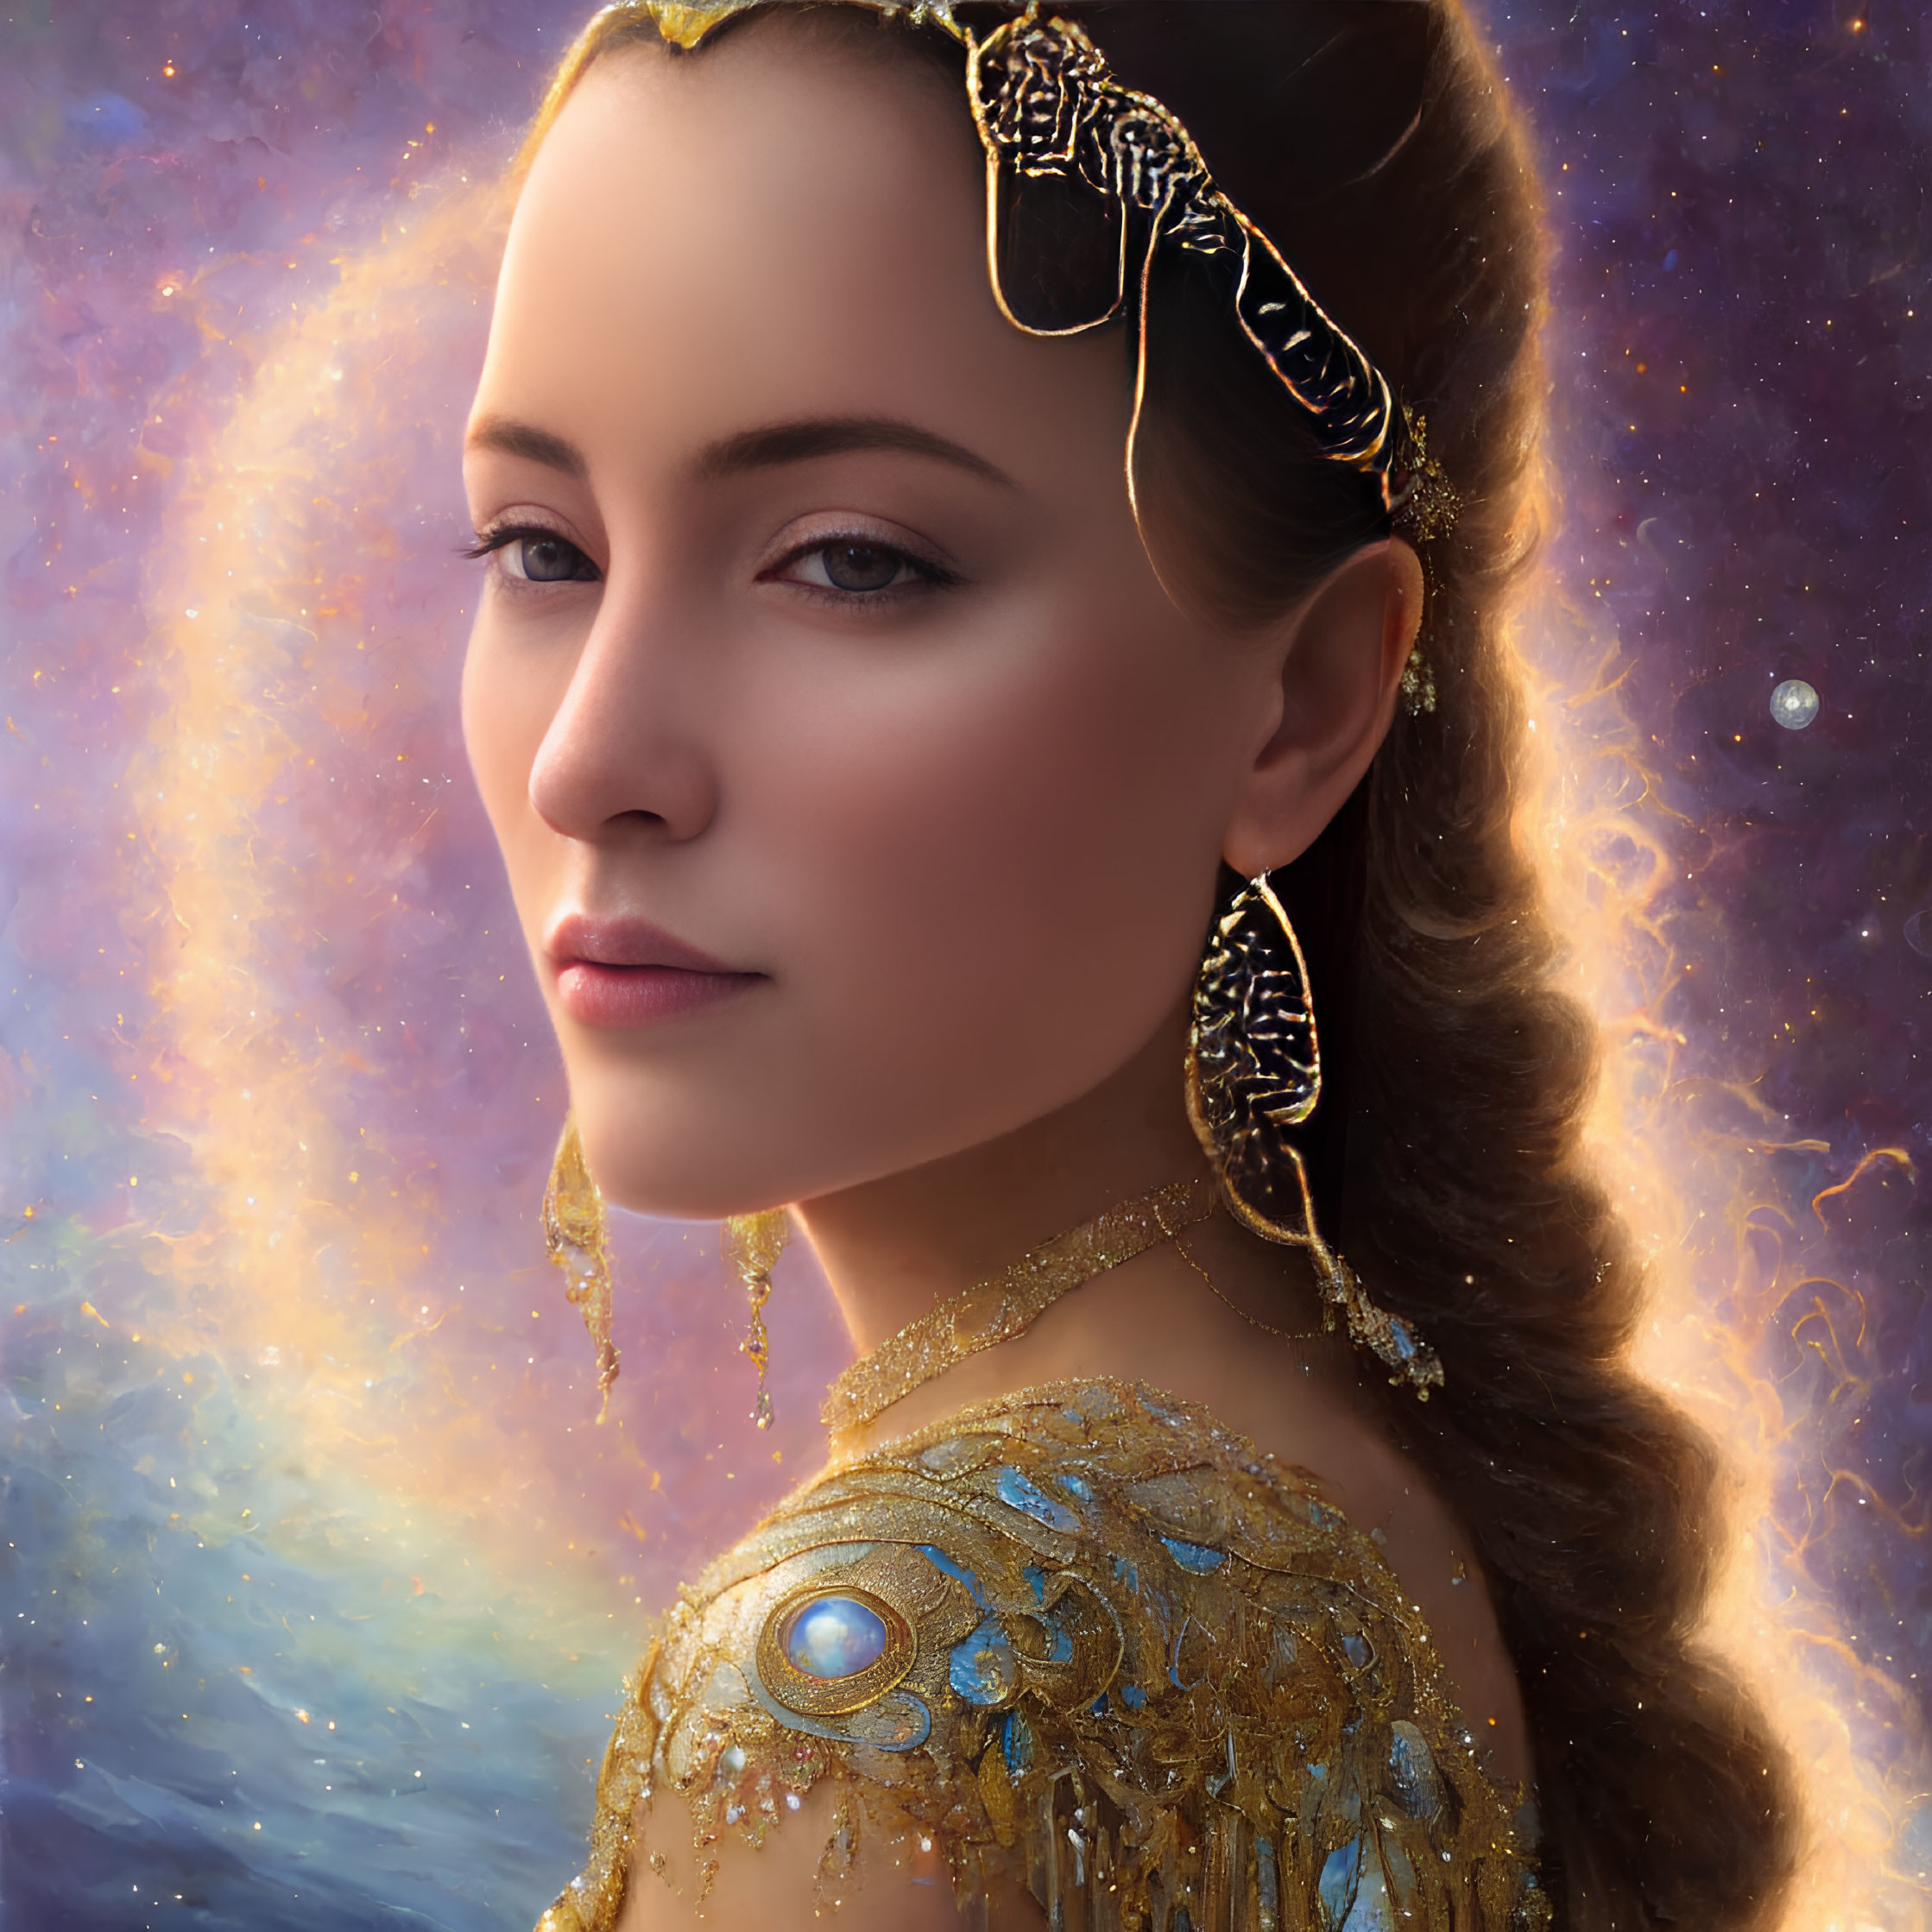 Ethereal woman adorned in golden jewelry on cosmic backdrop